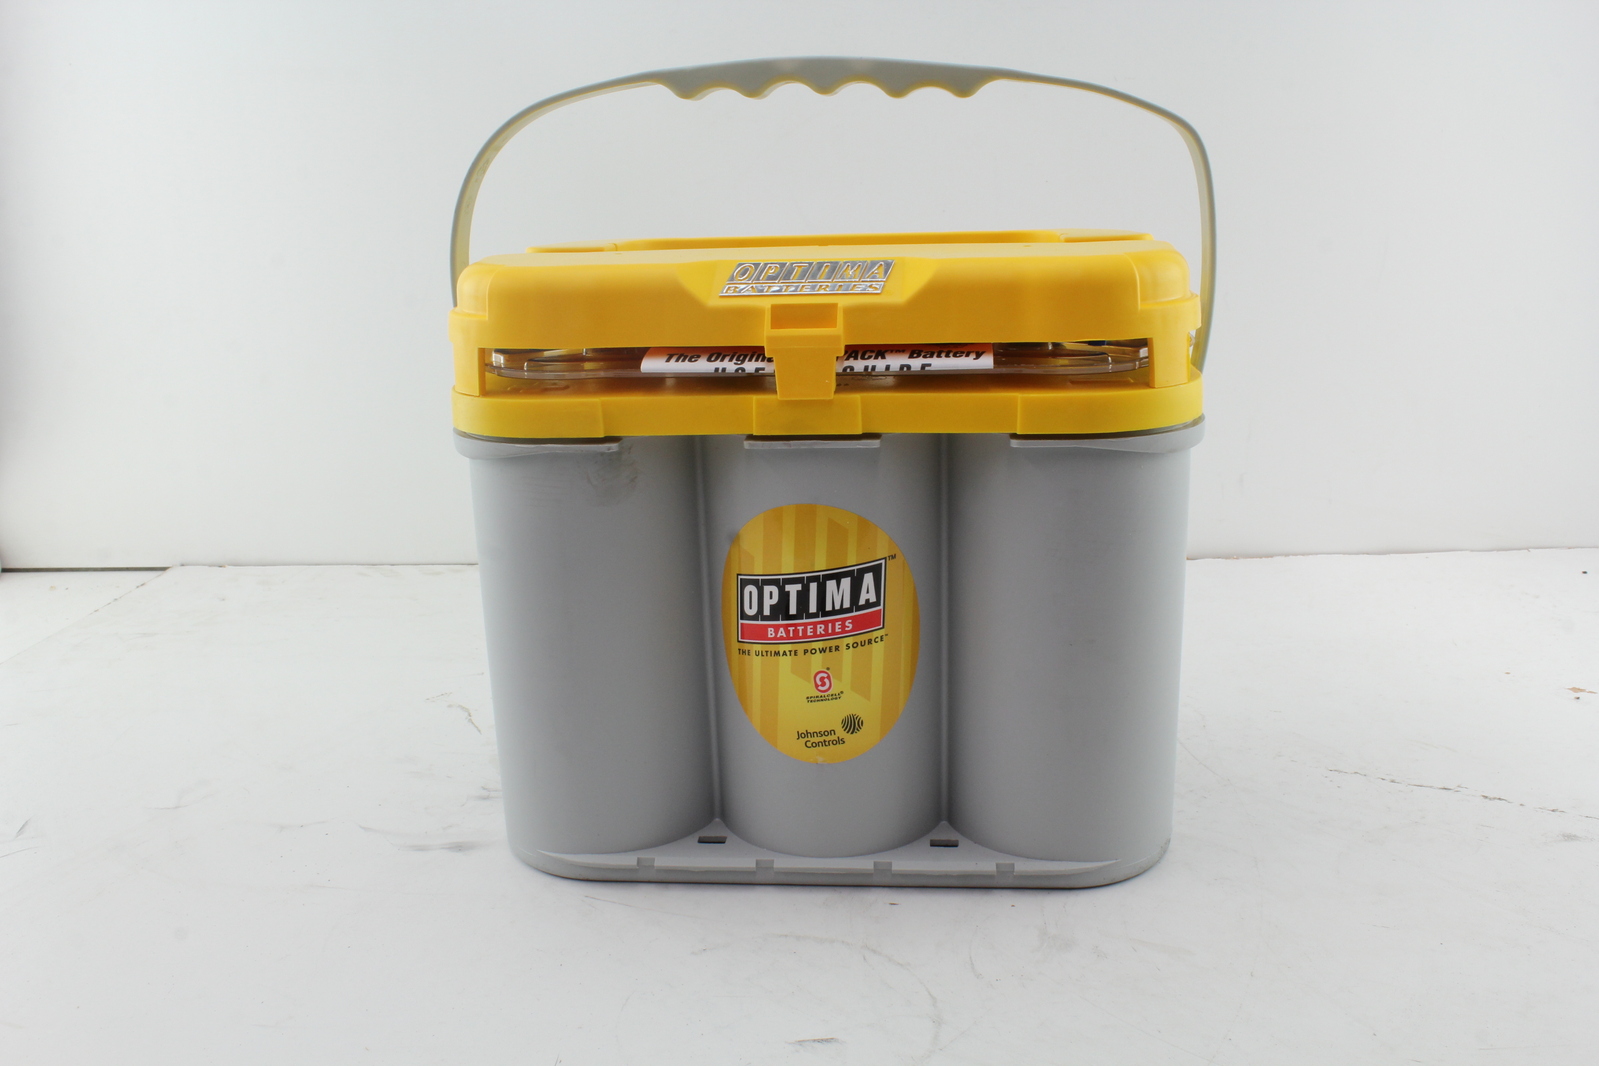 OPTIMA YELLOW TOP AGM DEEP CYCLE / STARTING BATTERY FOR 4X4 4WD CAMPING